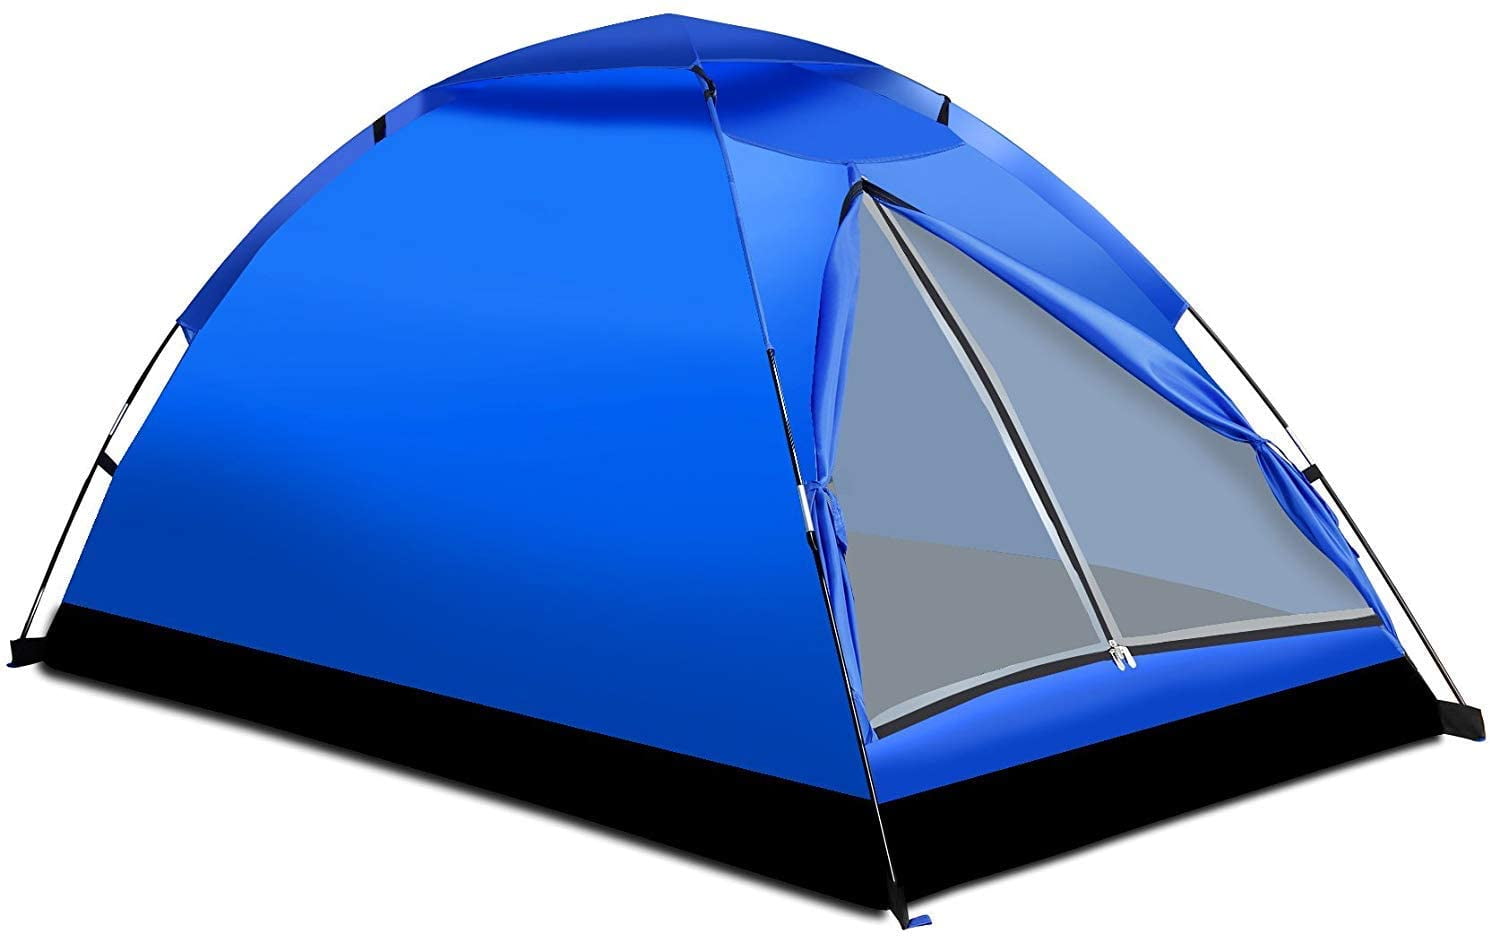 Details about   Lightweight Camping Dome Tent Alvantor 2 Person Folding Portable Carry Bag Blue 